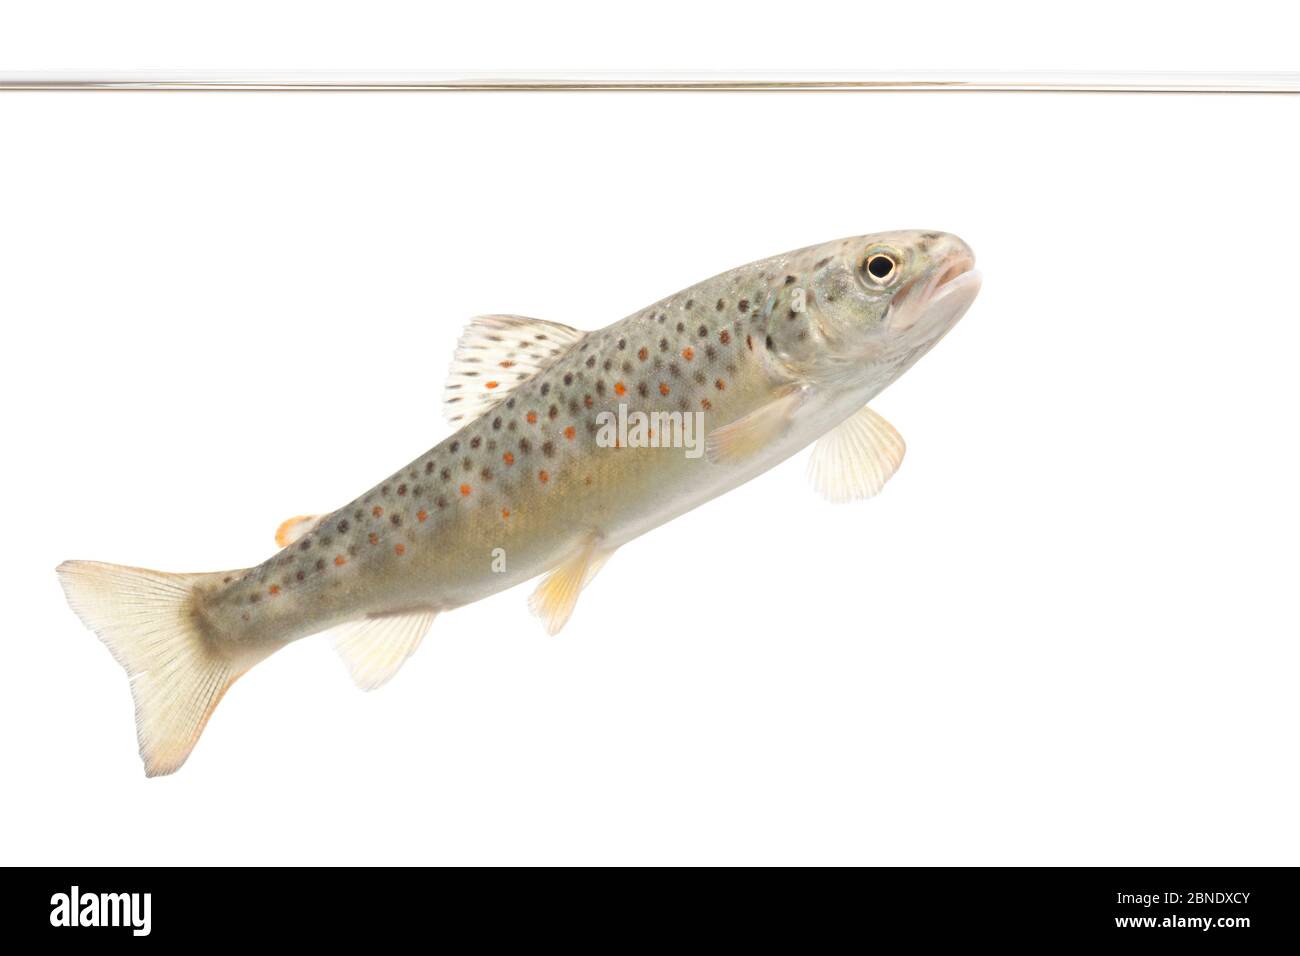 Brown trout (Salmo trutta fario) juvenile, The Netherlands, May, Meetyourneighbours.net project Stock Photo